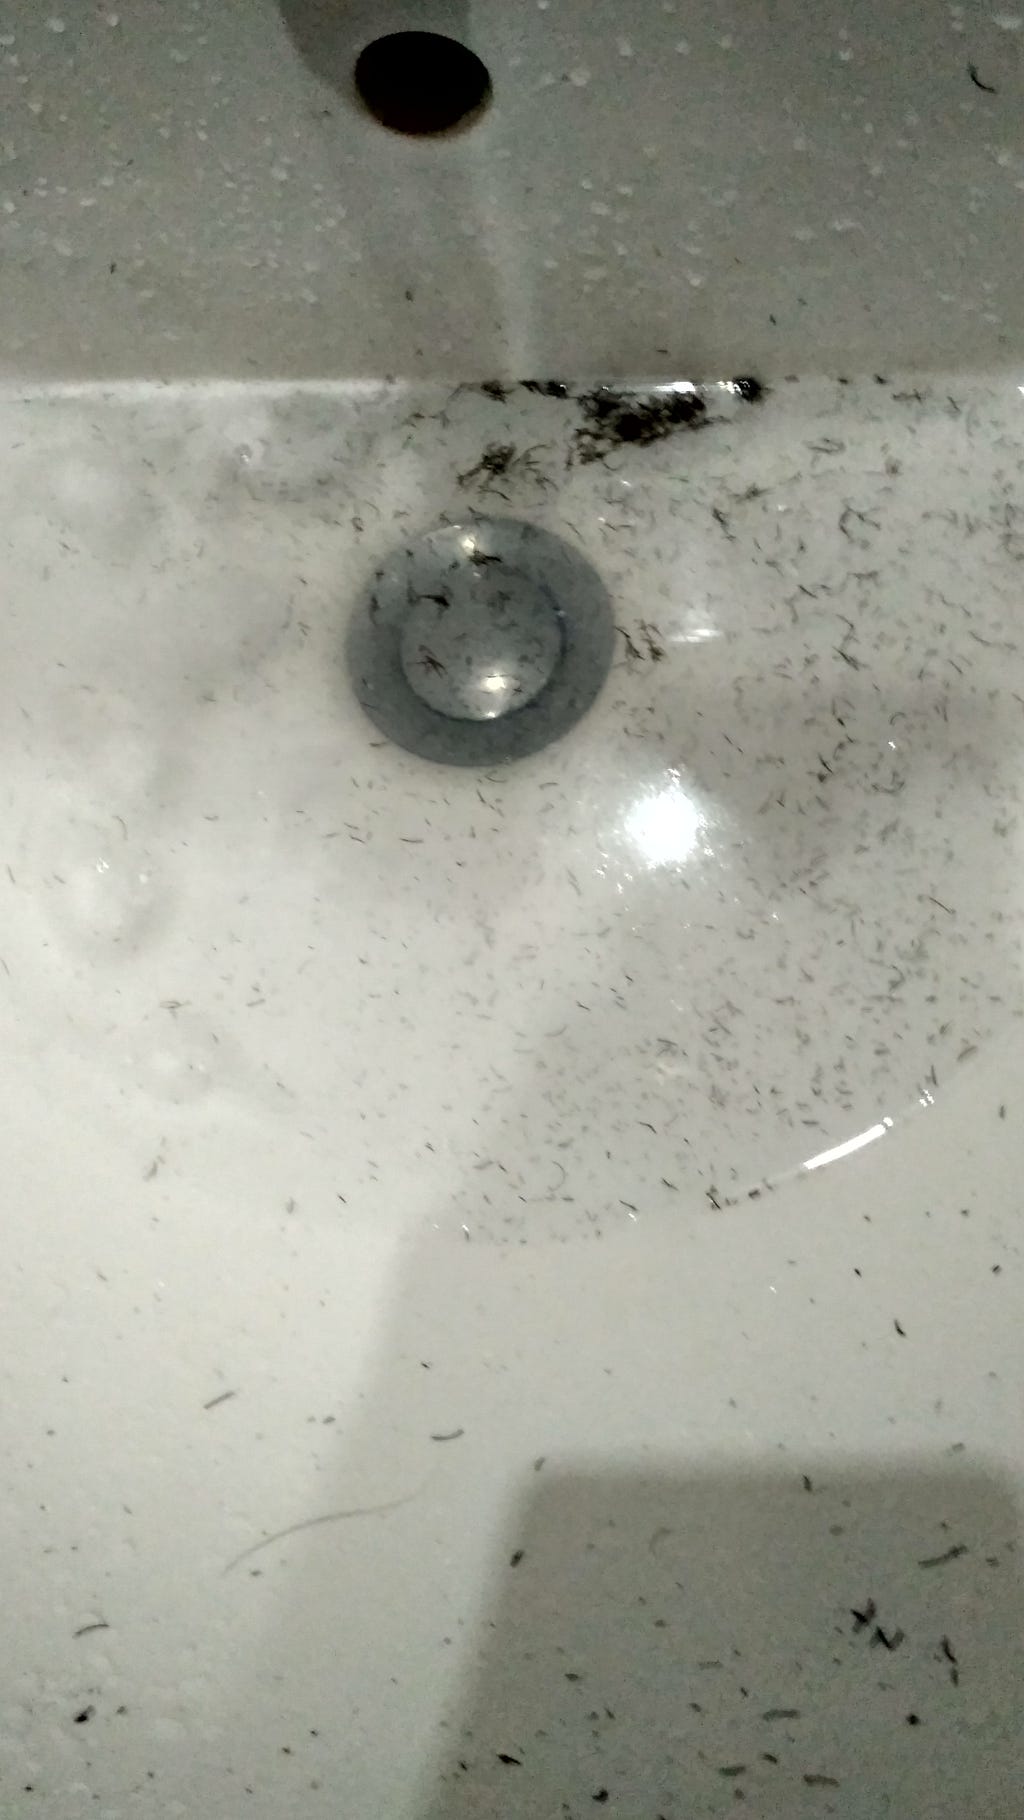 Sink full of water and beard remnants